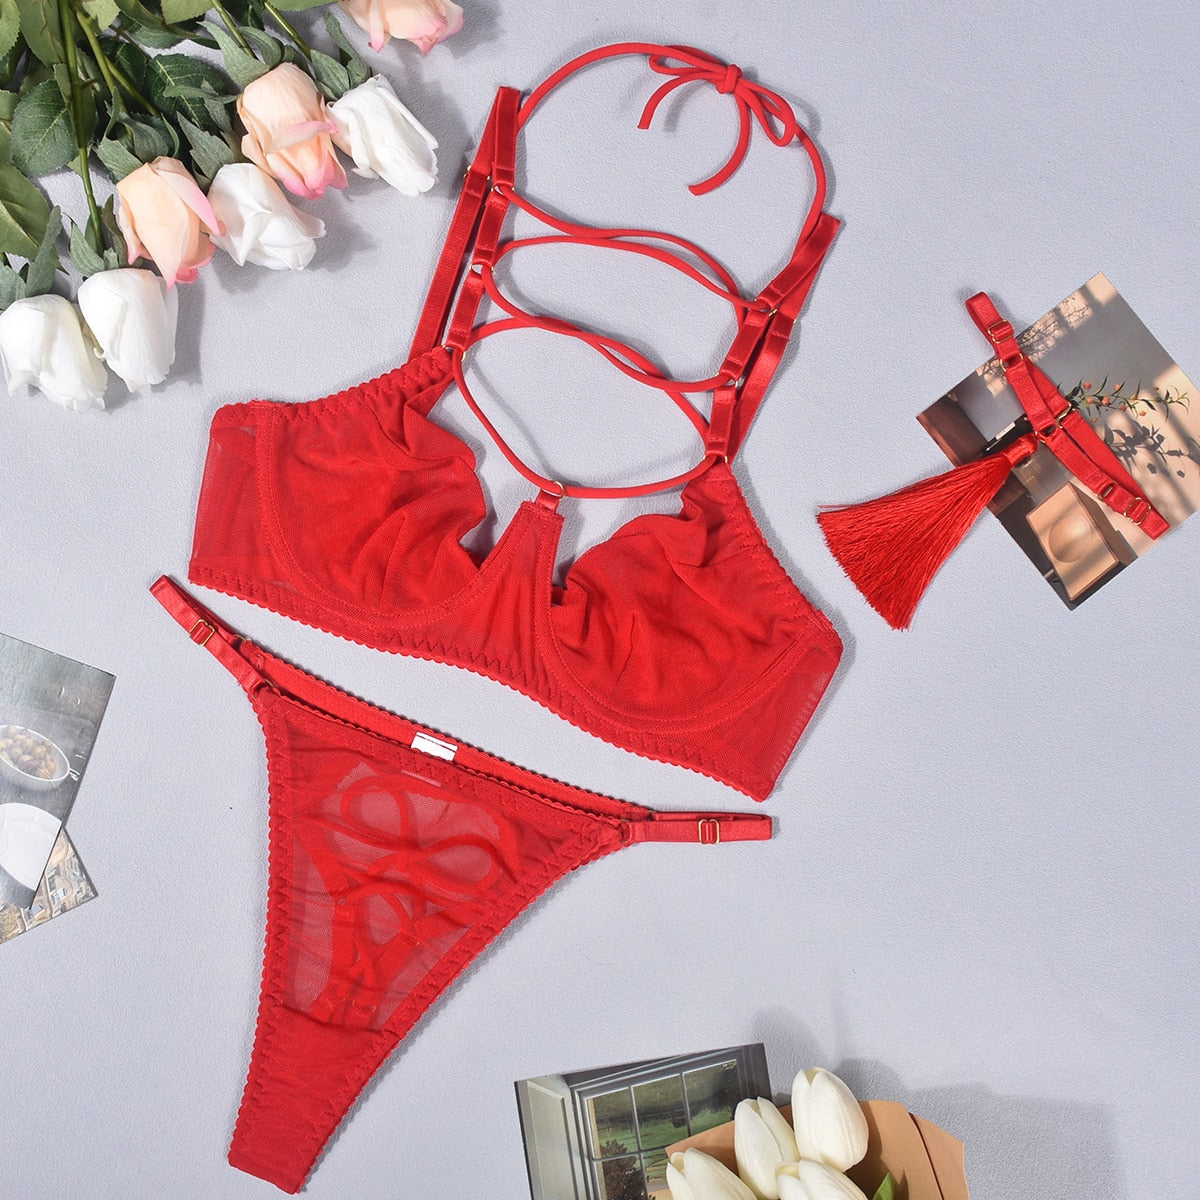 Ellolace Sexy Lingerie Bangdage Bra Brief Set Lace Underwear Women Fancy Tassels Bra Kit Push Up Outfit Seamless Red Exotic Sets